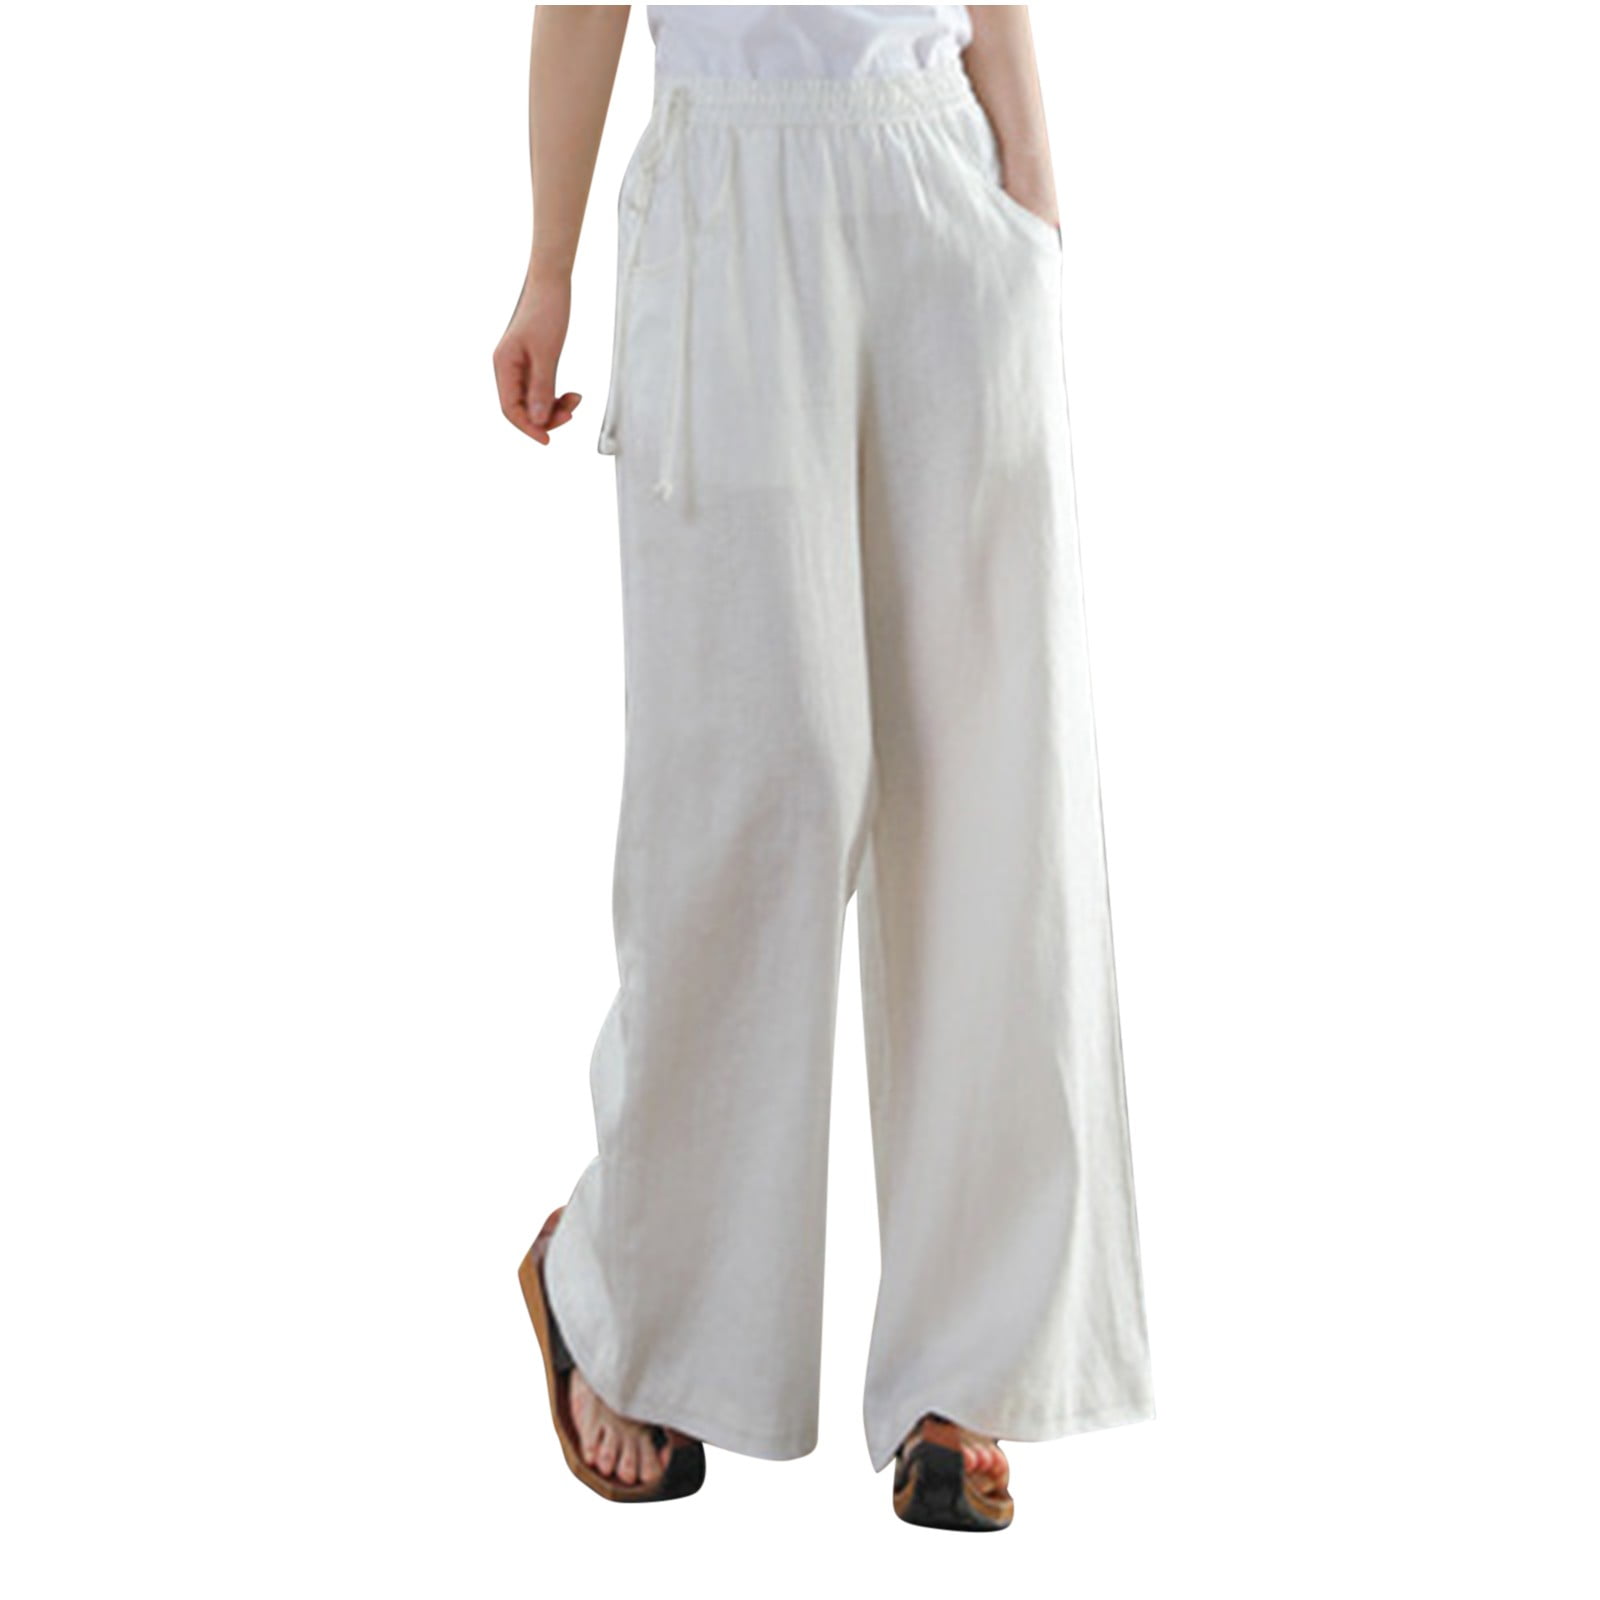 Womens Lounge Pants Cotton Linen Lightweight Wide Leg Pants for Women  Casual Loose Fitting Solid Slacks Trousers (Medium, White)